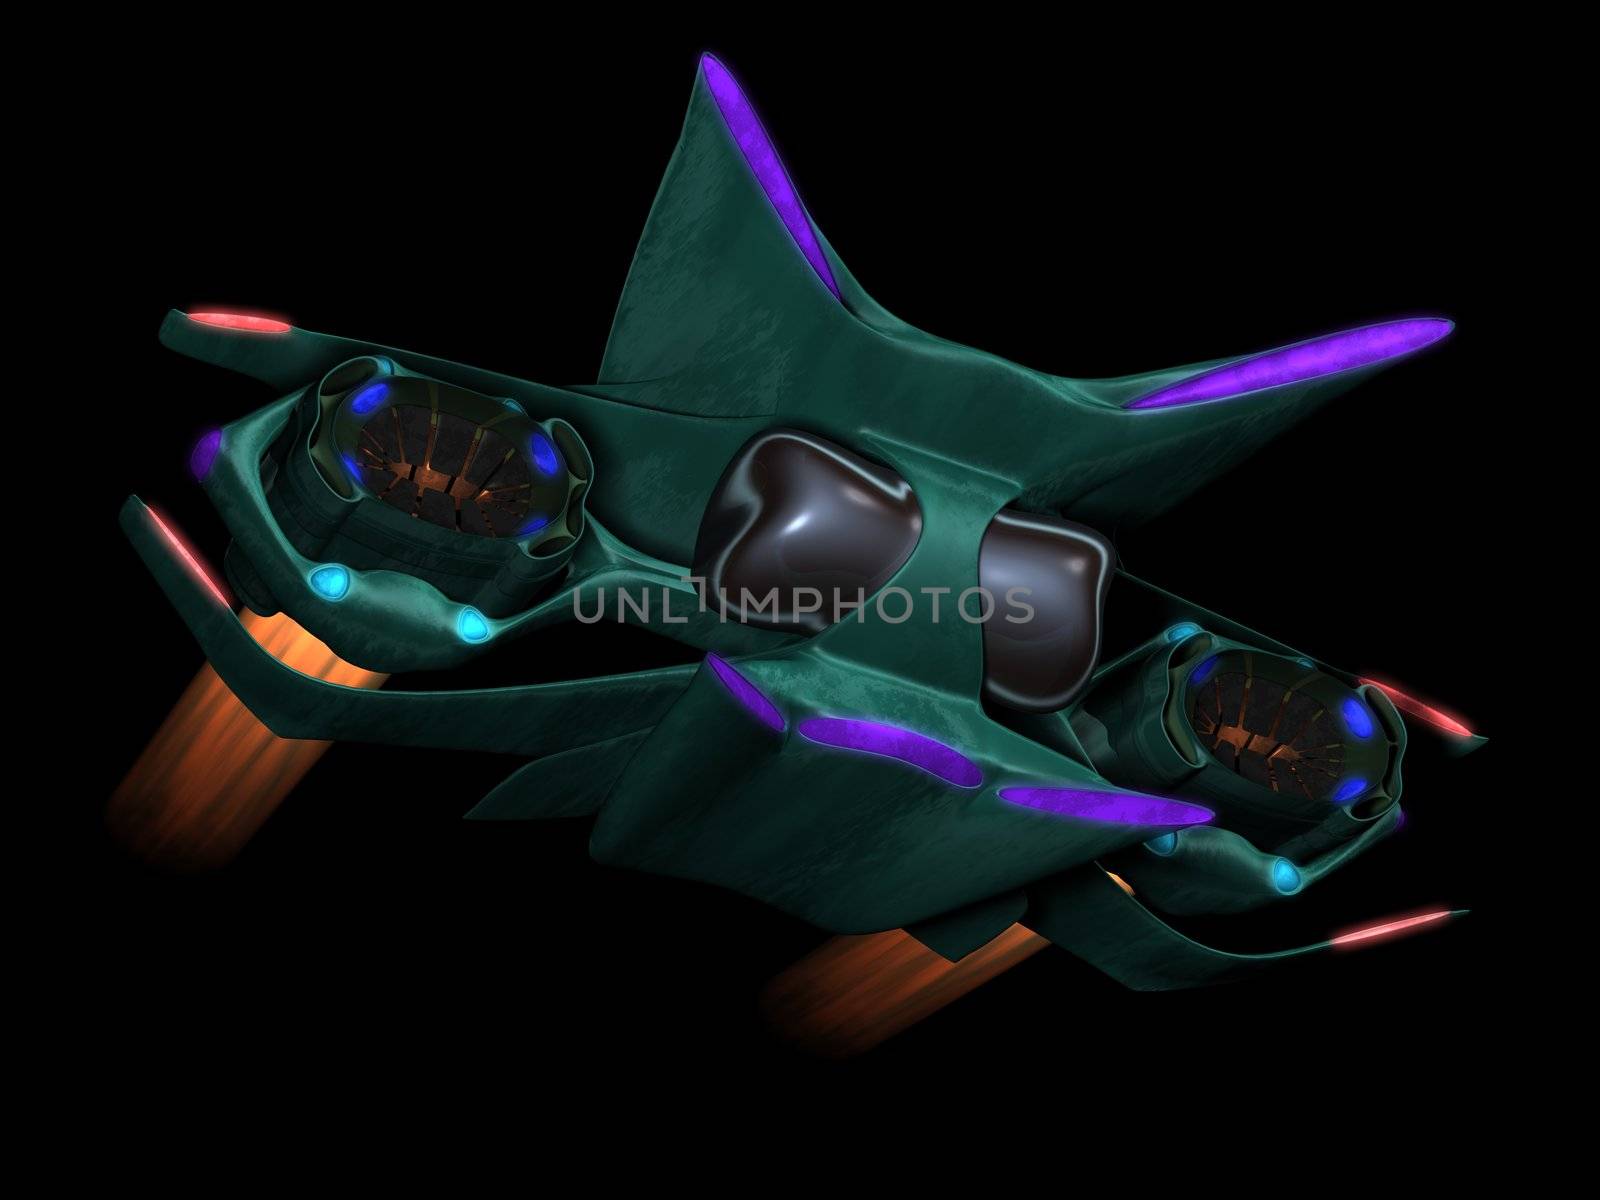 Alien space ship front view by shkyo30